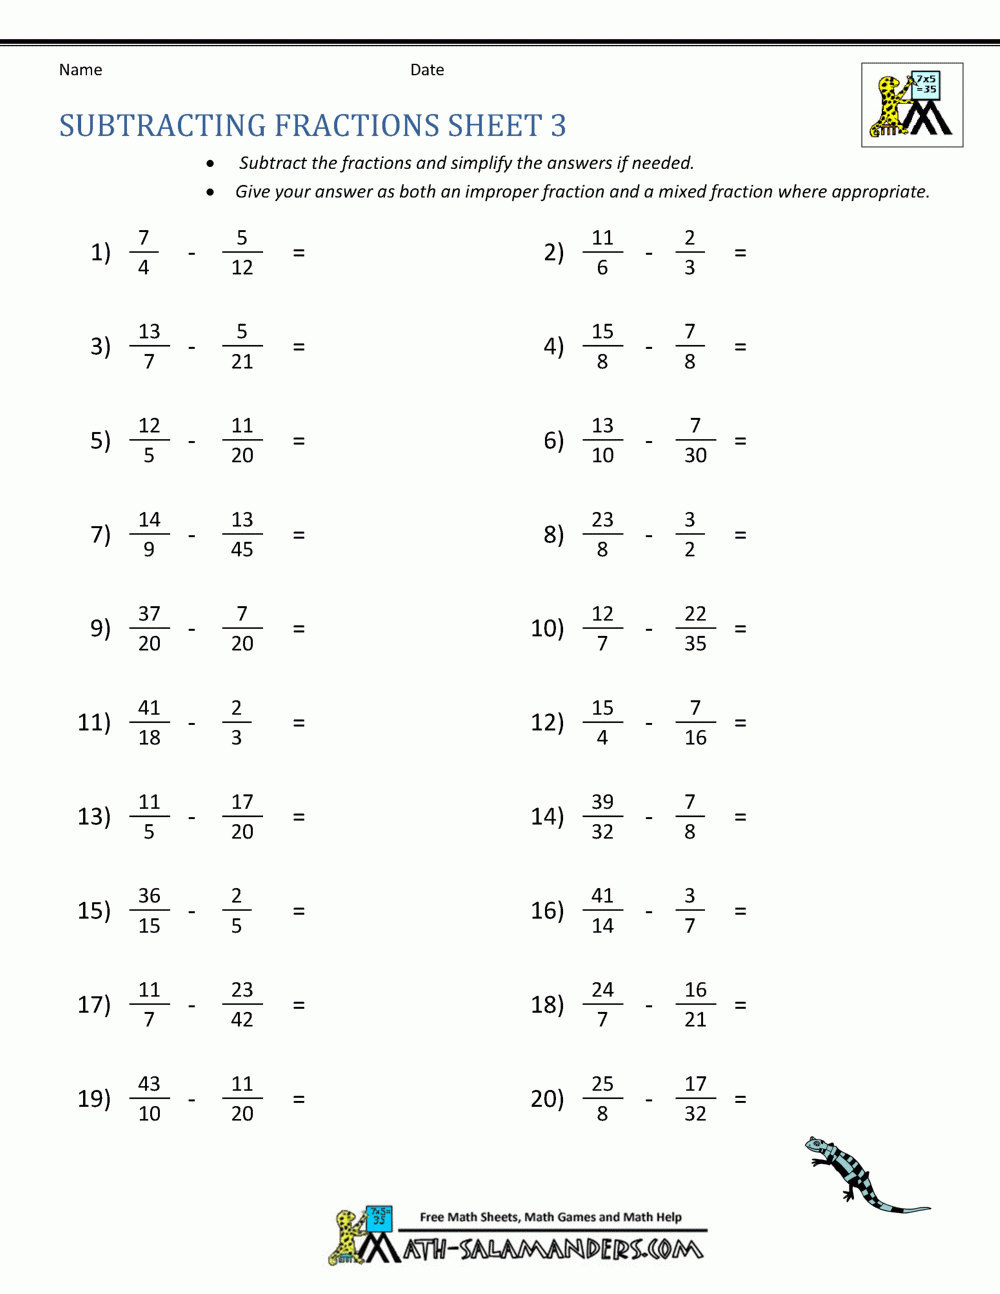 Subtraction Of Fractions Worksheets With Answers FractionsWorksheets net